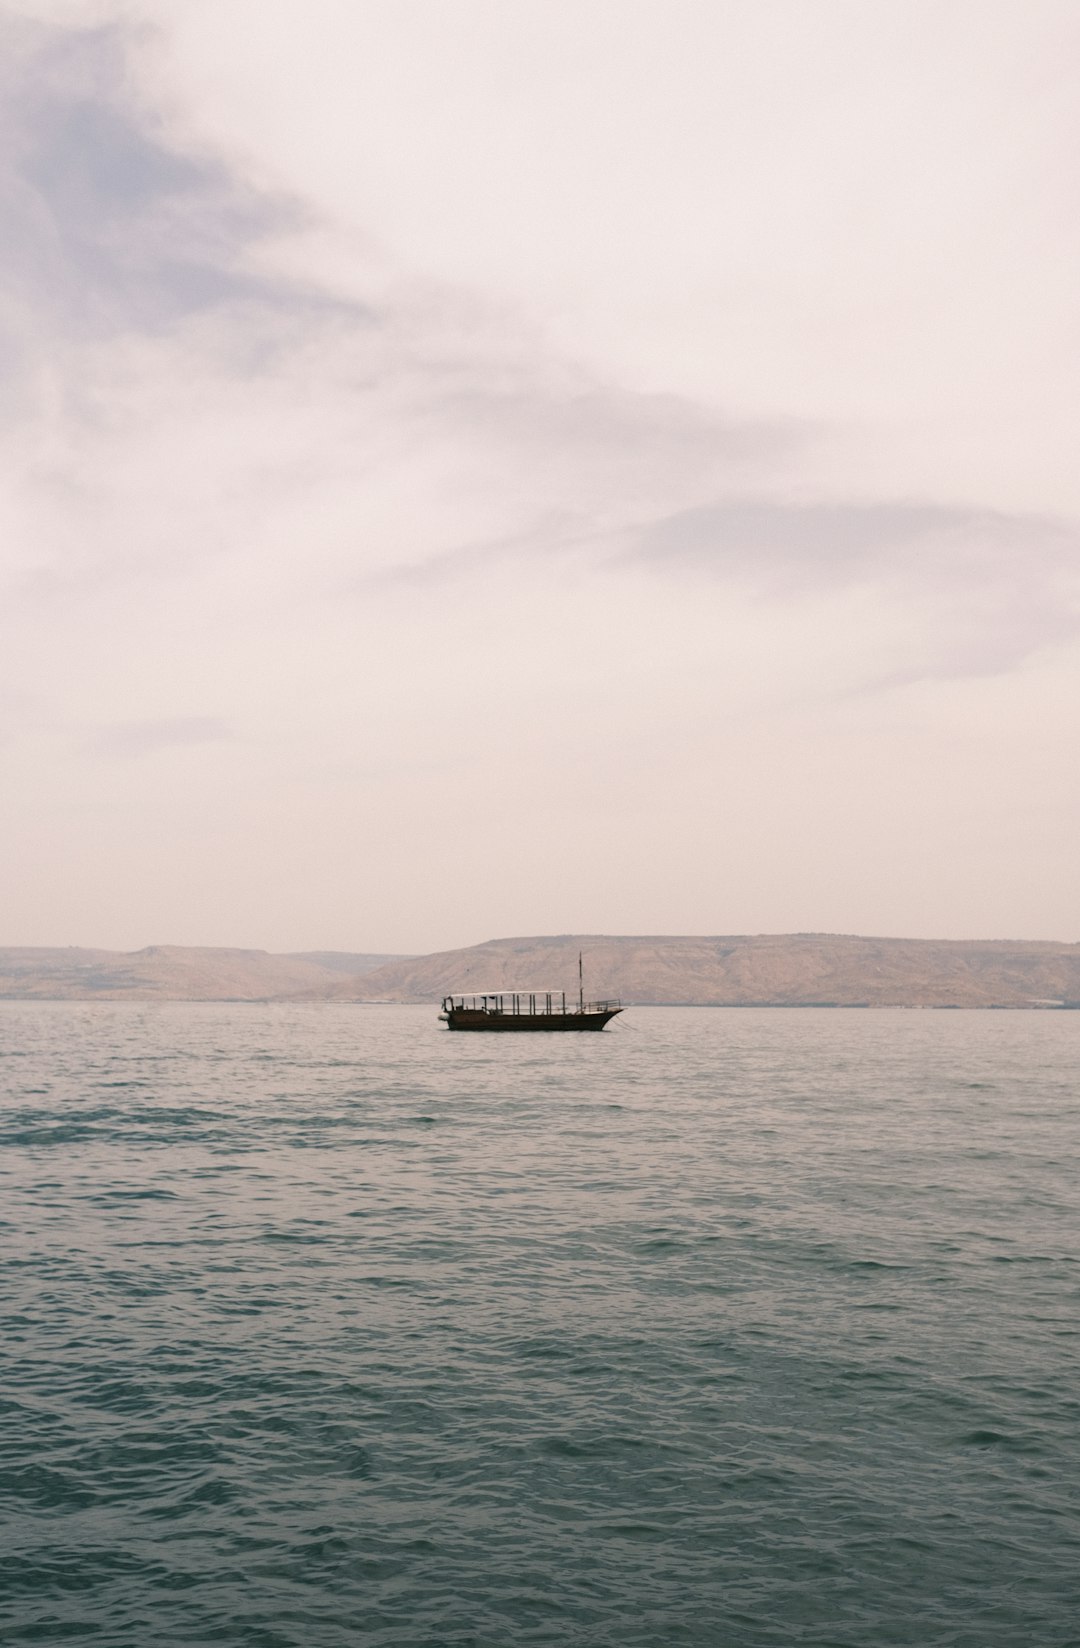 Travel Tips and Stories of Tiberias in Israel